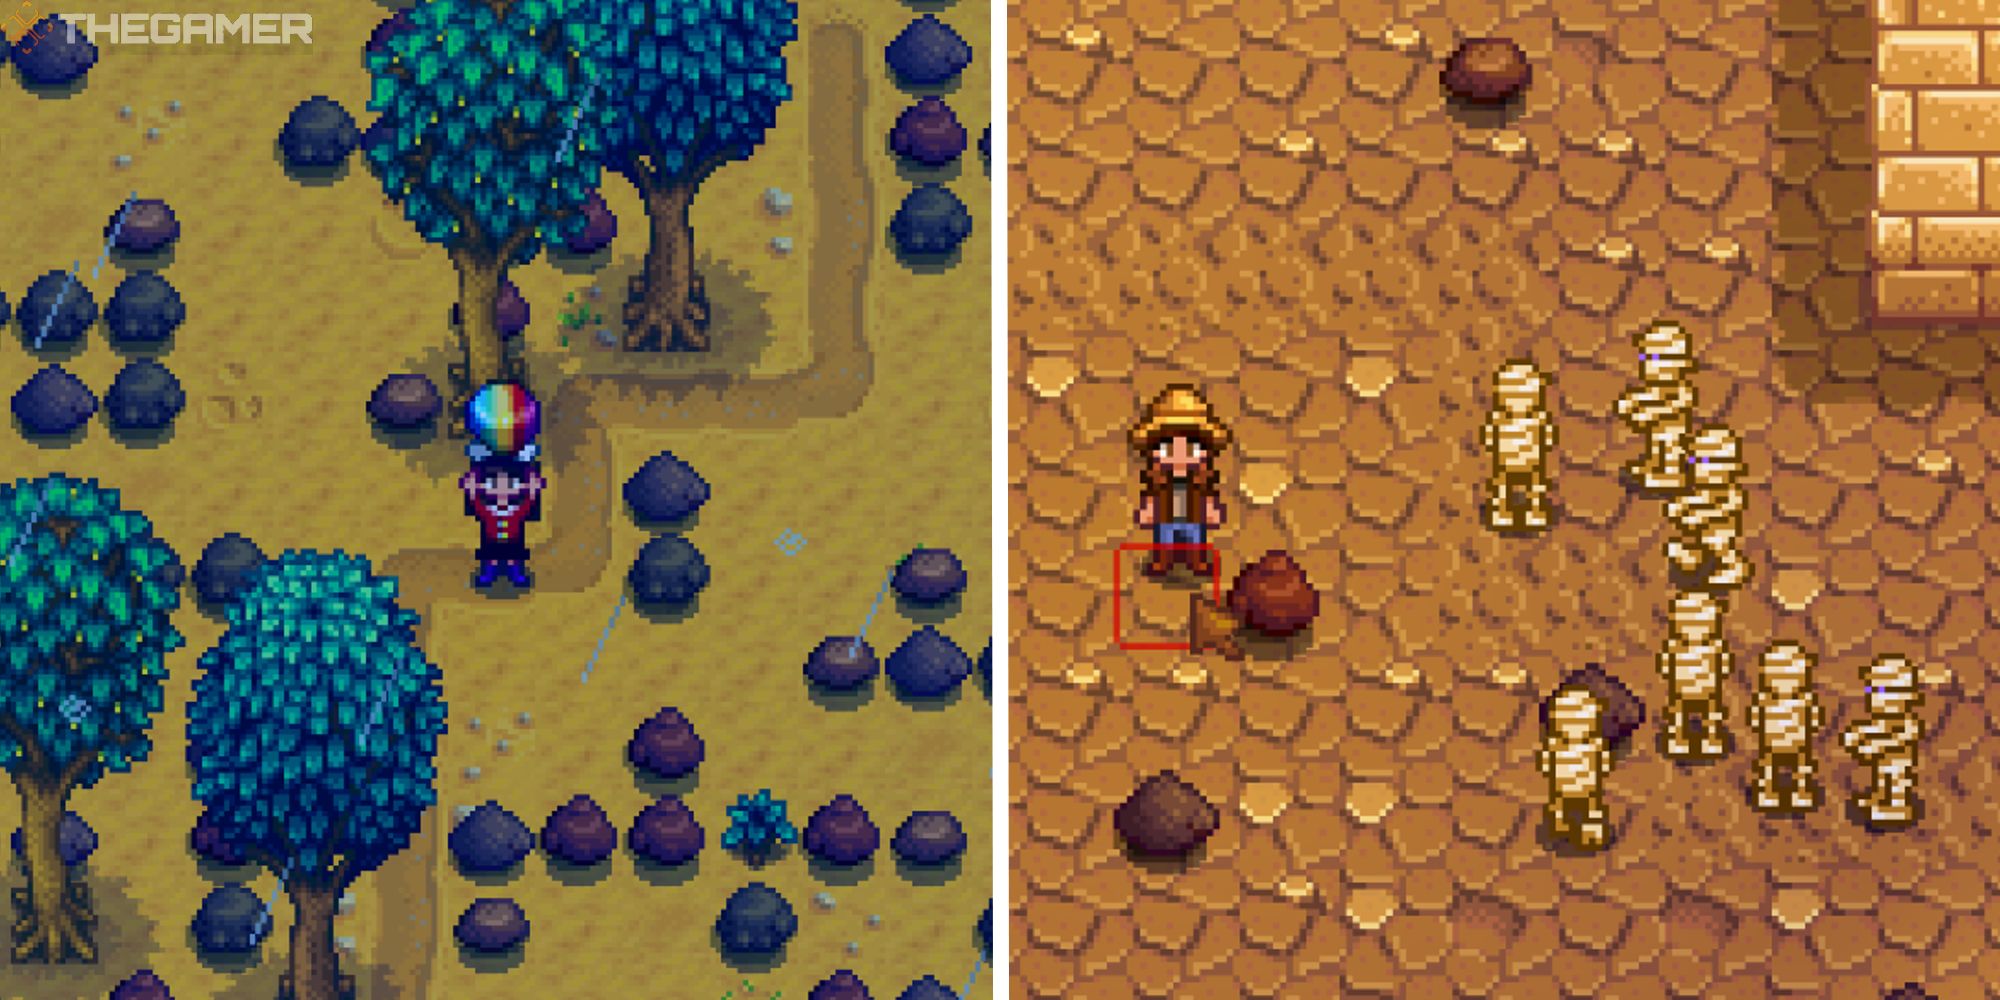 Tips For Finding A Prismatic Shard In Stardew Valley